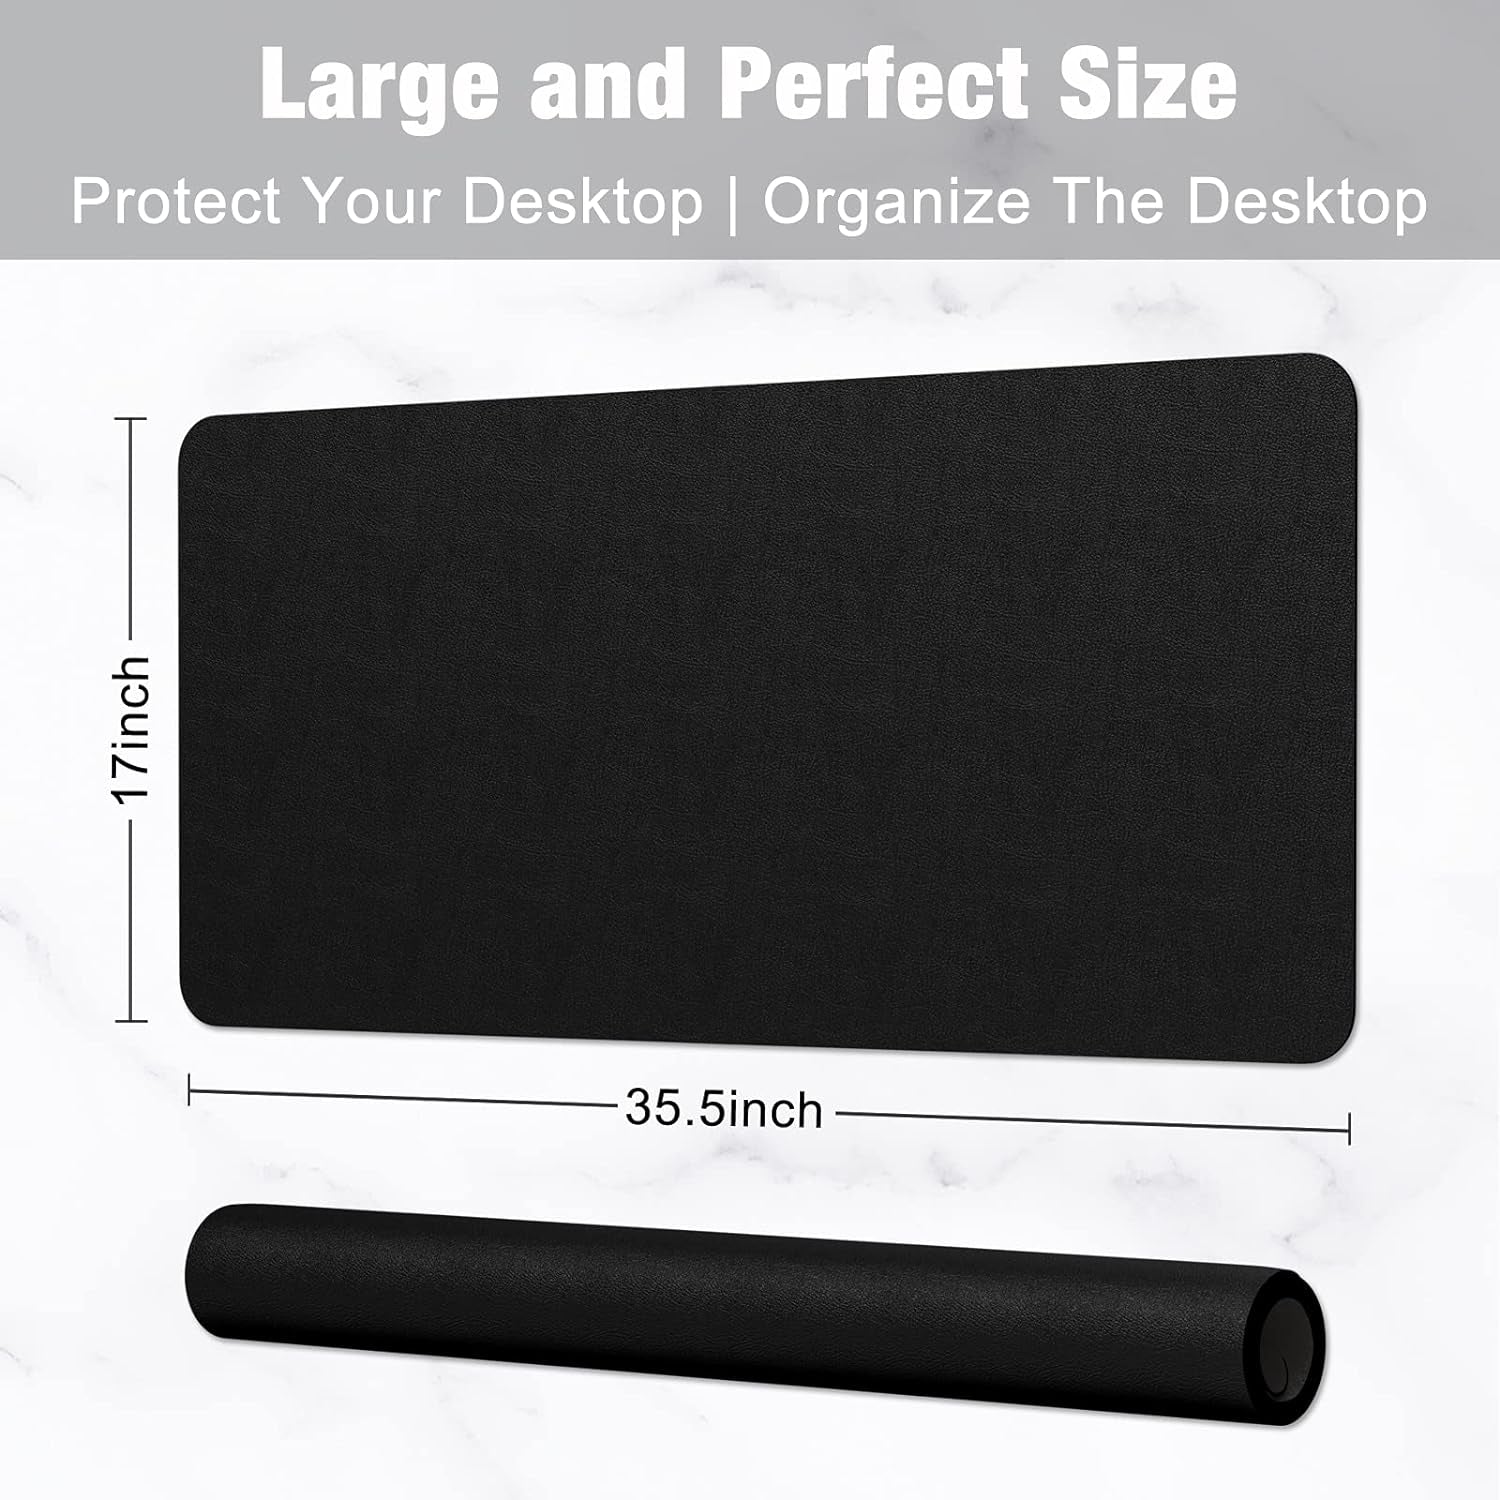 Desk Pad, 35.5" X 17" PU Leather Desk Mat, M Extended Mouse Pad, Waterproof Desk Blotter Protector, Ultra Thin Large Laptop Keyboard Mat, Non-Slip Desk Writing Pad for Office Home, Black